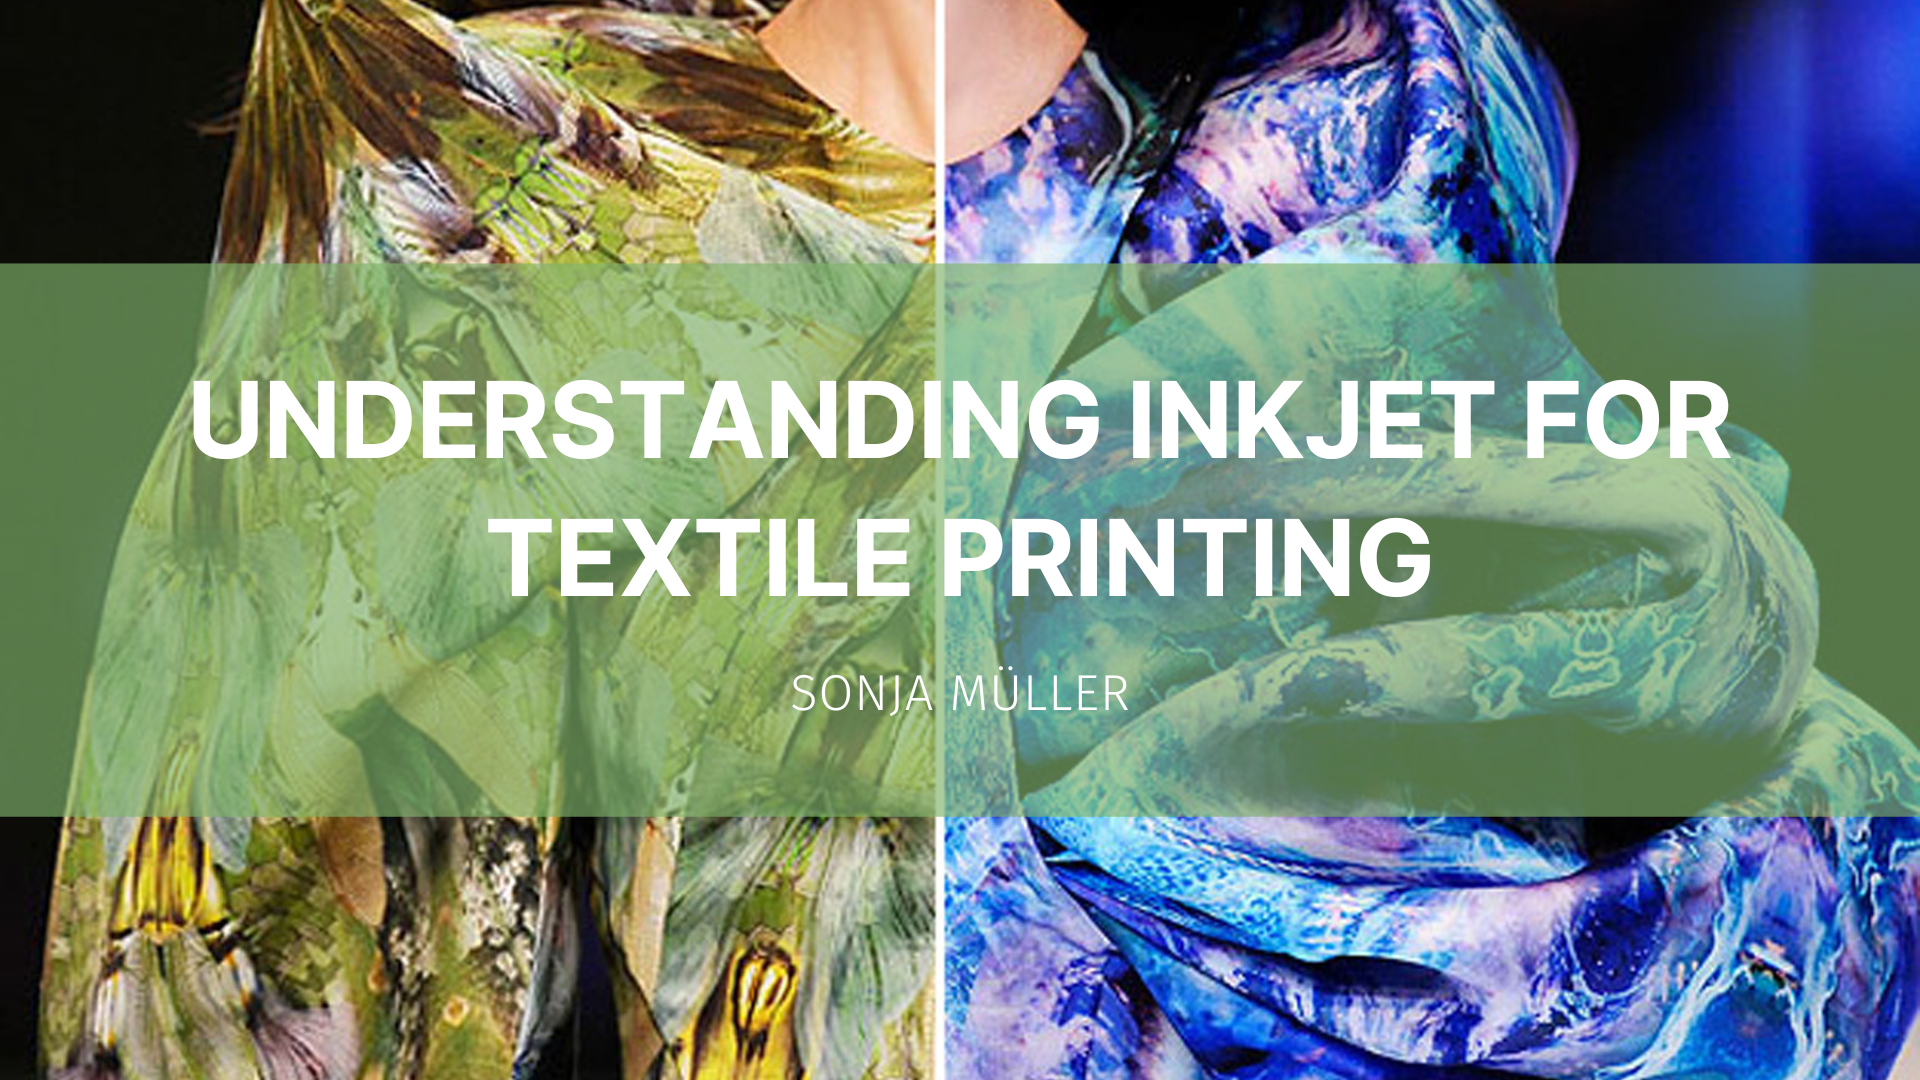 Featured image for “Understanding inkjet for textile printing”